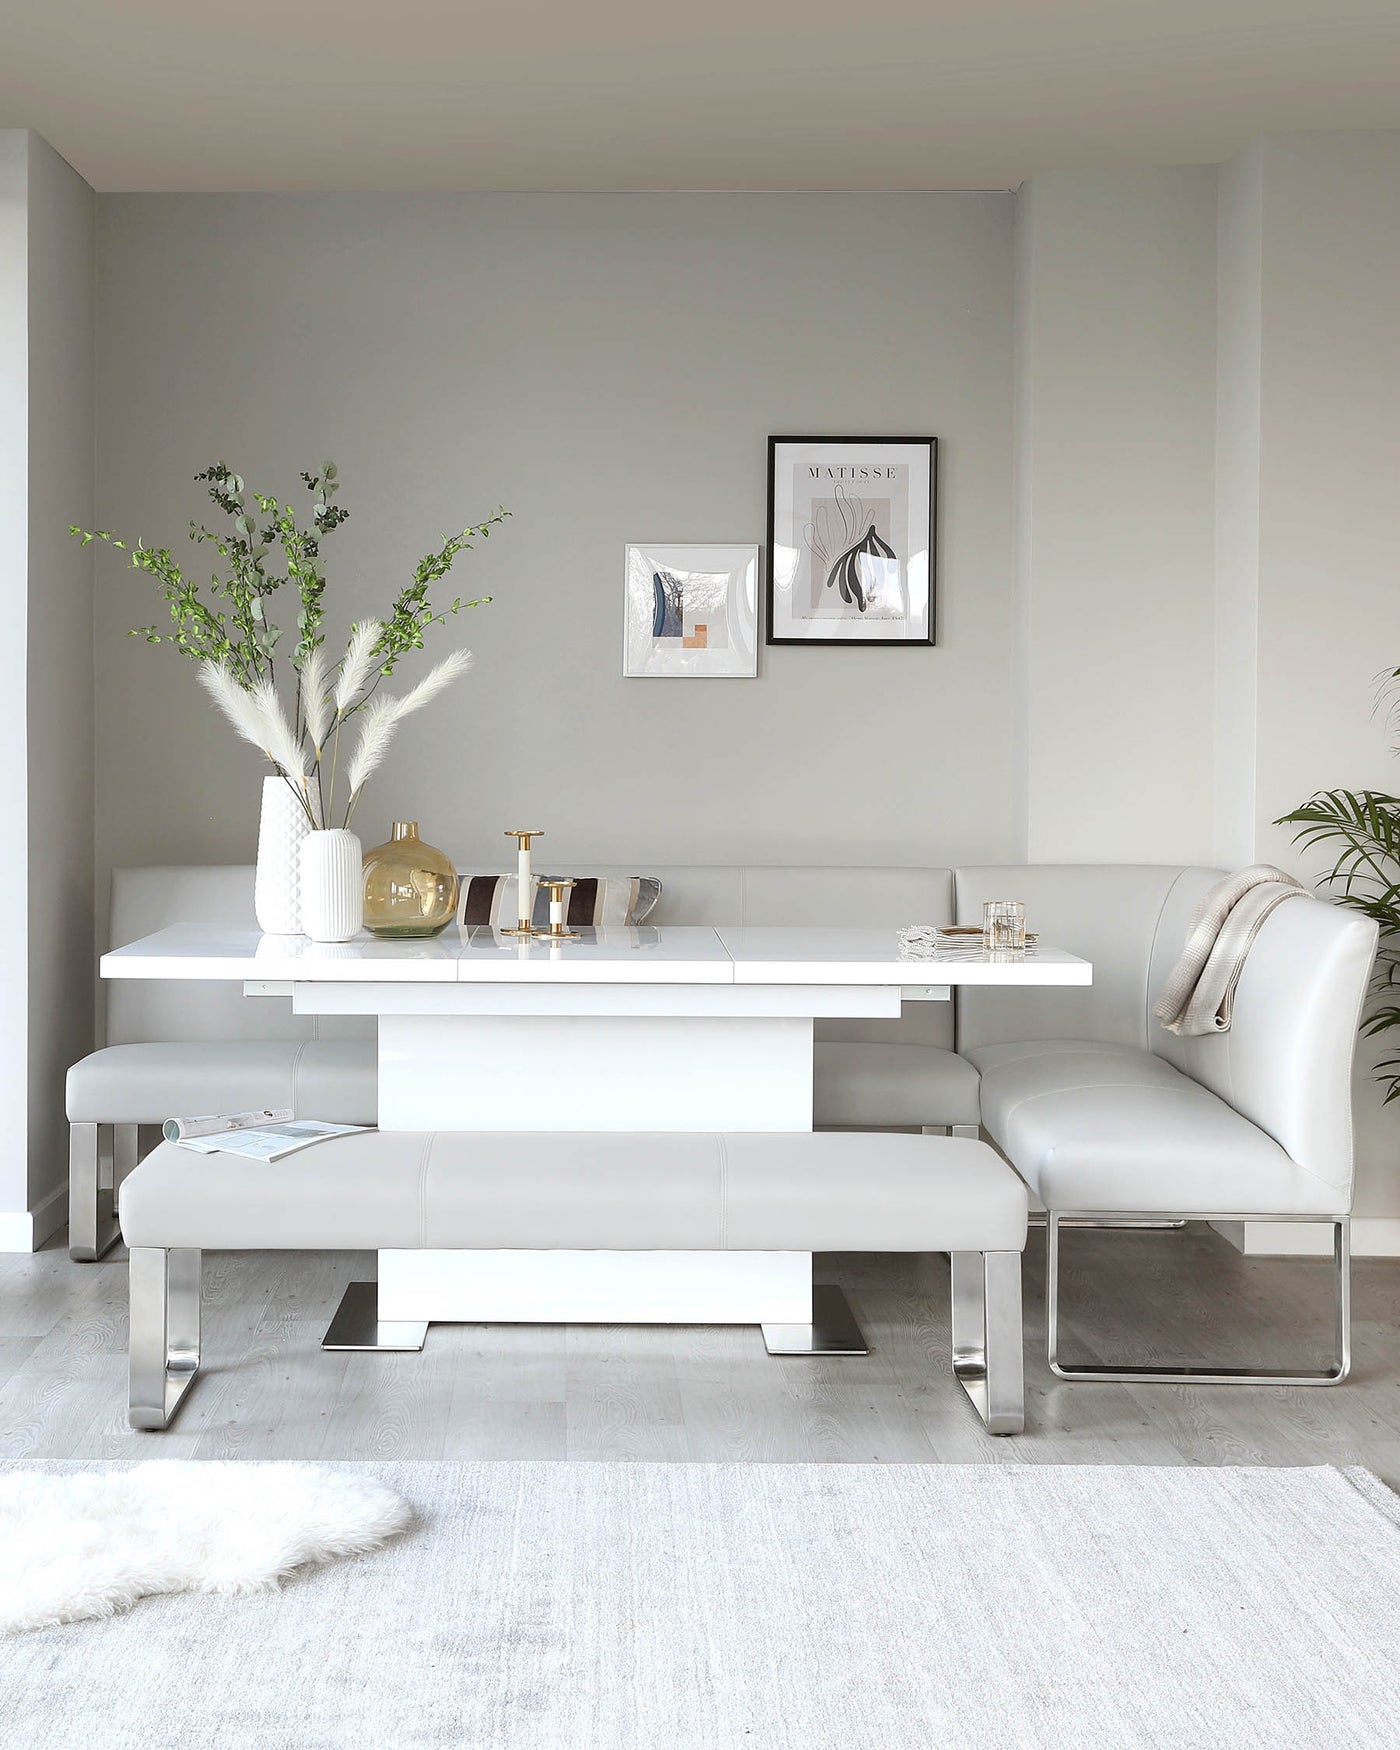 Modern dining set featuring a glossy white rectangular table with polished chrome legs, paired with a matching white leather upholstered bench on one side and a luxurious white leather dining chair with a uniquely curved backrest and chrome frame on the other. A fluffy white rug lies beneath.